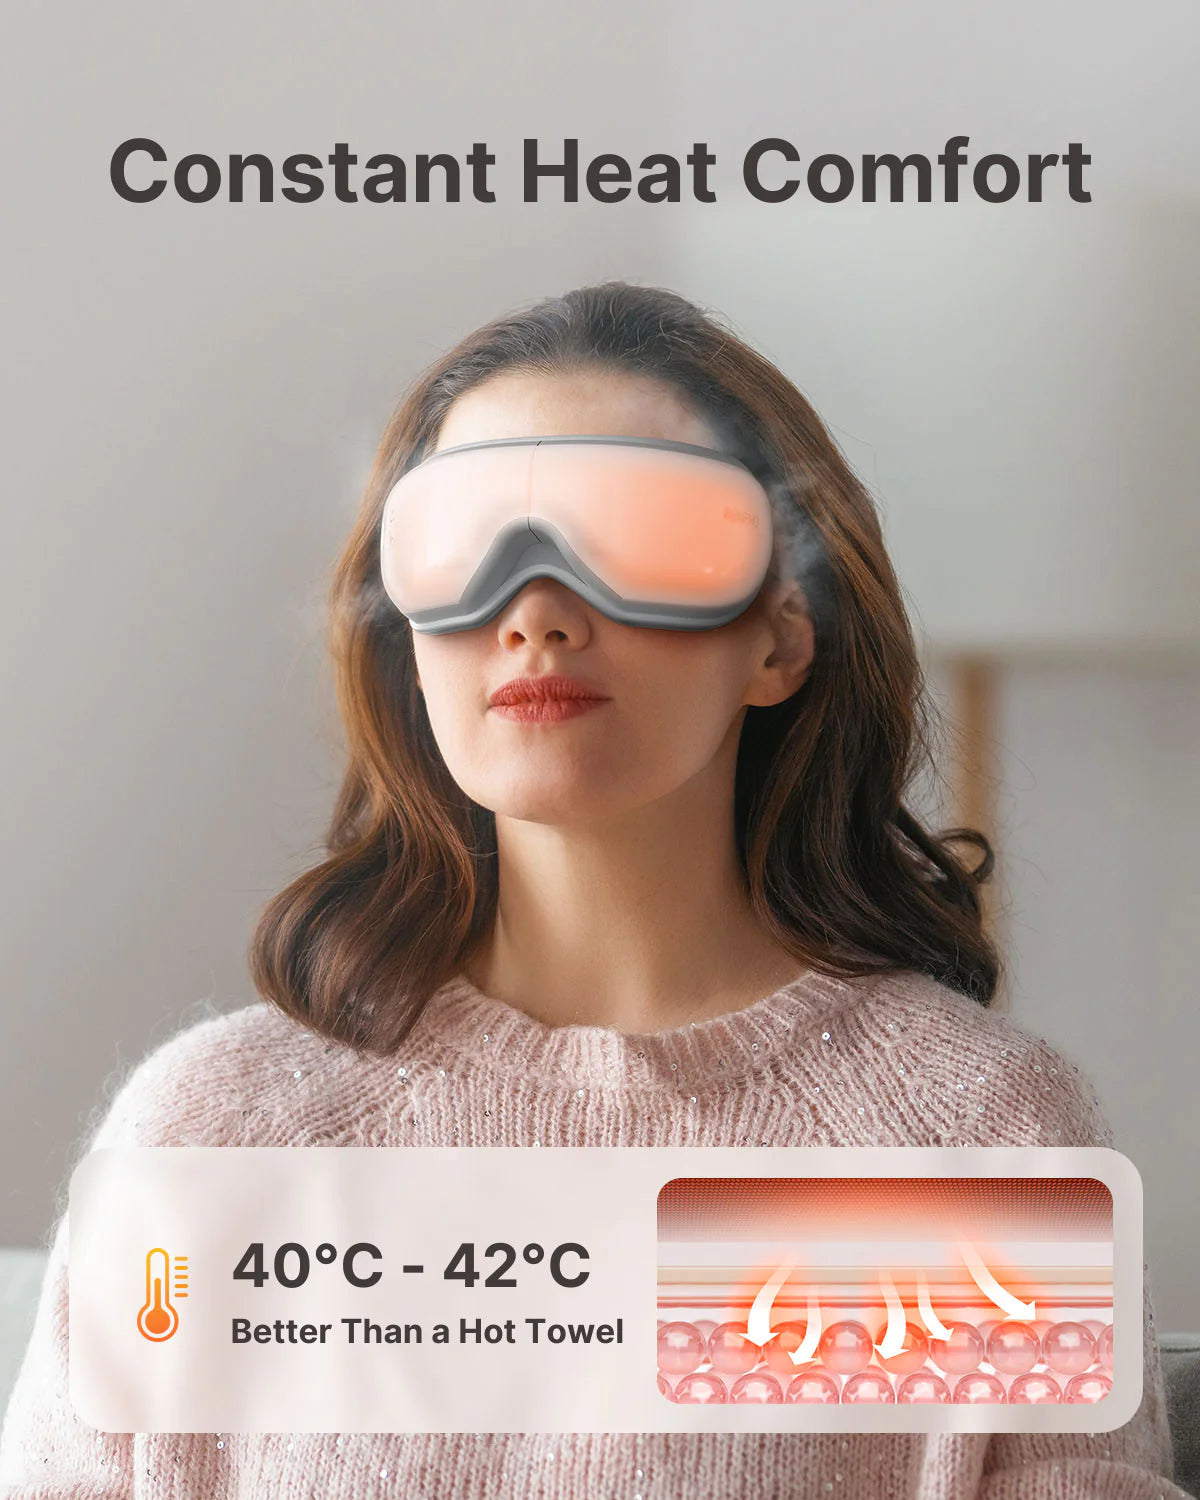 A woman with long brown hair wears a Renpho EU Eyeris 1 Eye Massager, emitting a soft orange glow, while sitting indoors. She is dressed in a pink knit sweater. Text at the top reads "Relieve Eye Strain Comfort." An inset at the bottom shows a close-up of the heating elements with text "40°C - 42°C Better Than a Hot Towel.